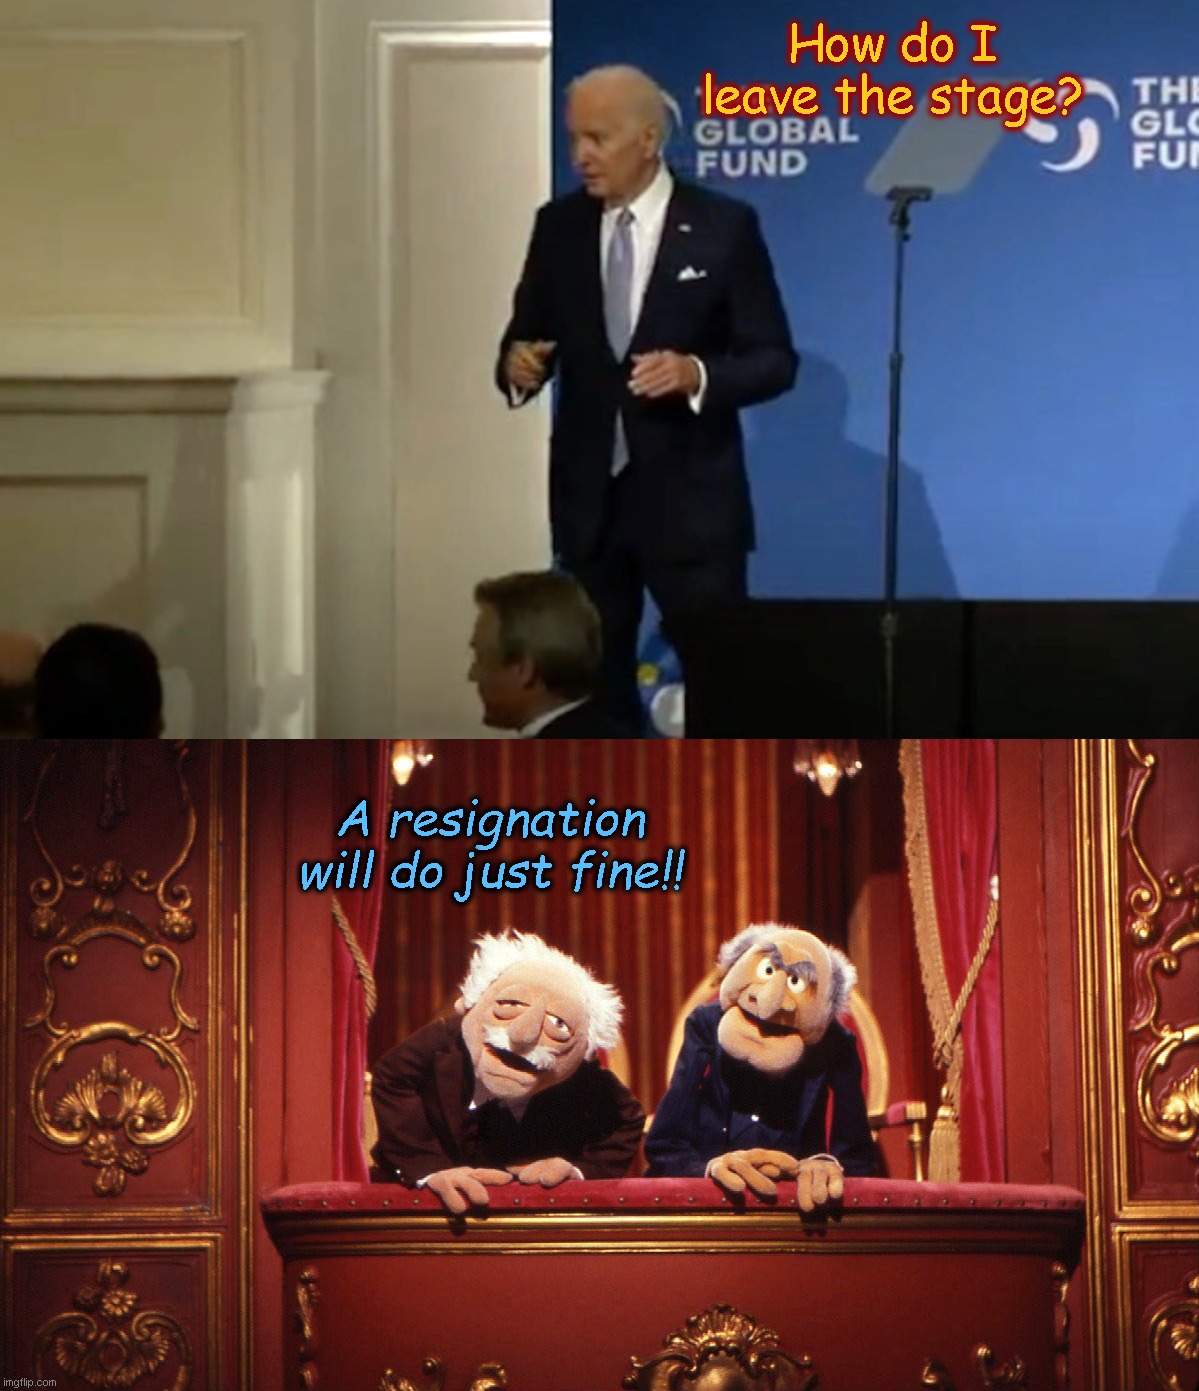 A lost Biden asks for help getting off stage at U.N. Global Fund Conference | How do I leave the stage? A resignation will do just fine!! | image tagged in waldorf and statler from the muppets,joe biden,united nations,embarrassing,biden fail,political humor | made w/ Imgflip meme maker